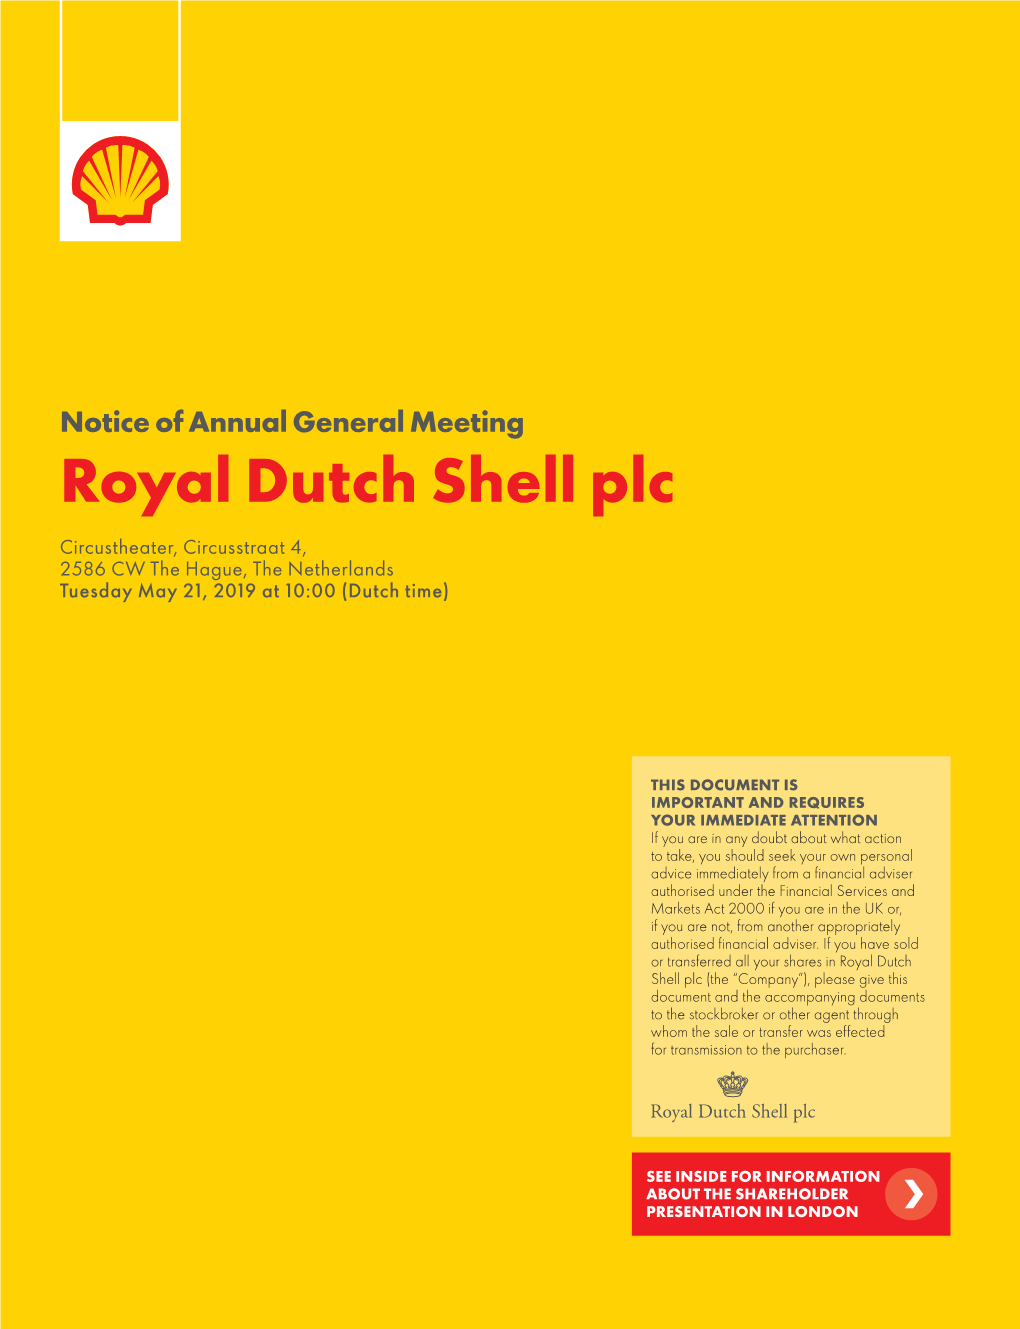 Notice of Annual General Meeting Royal Dutch Shell Plc